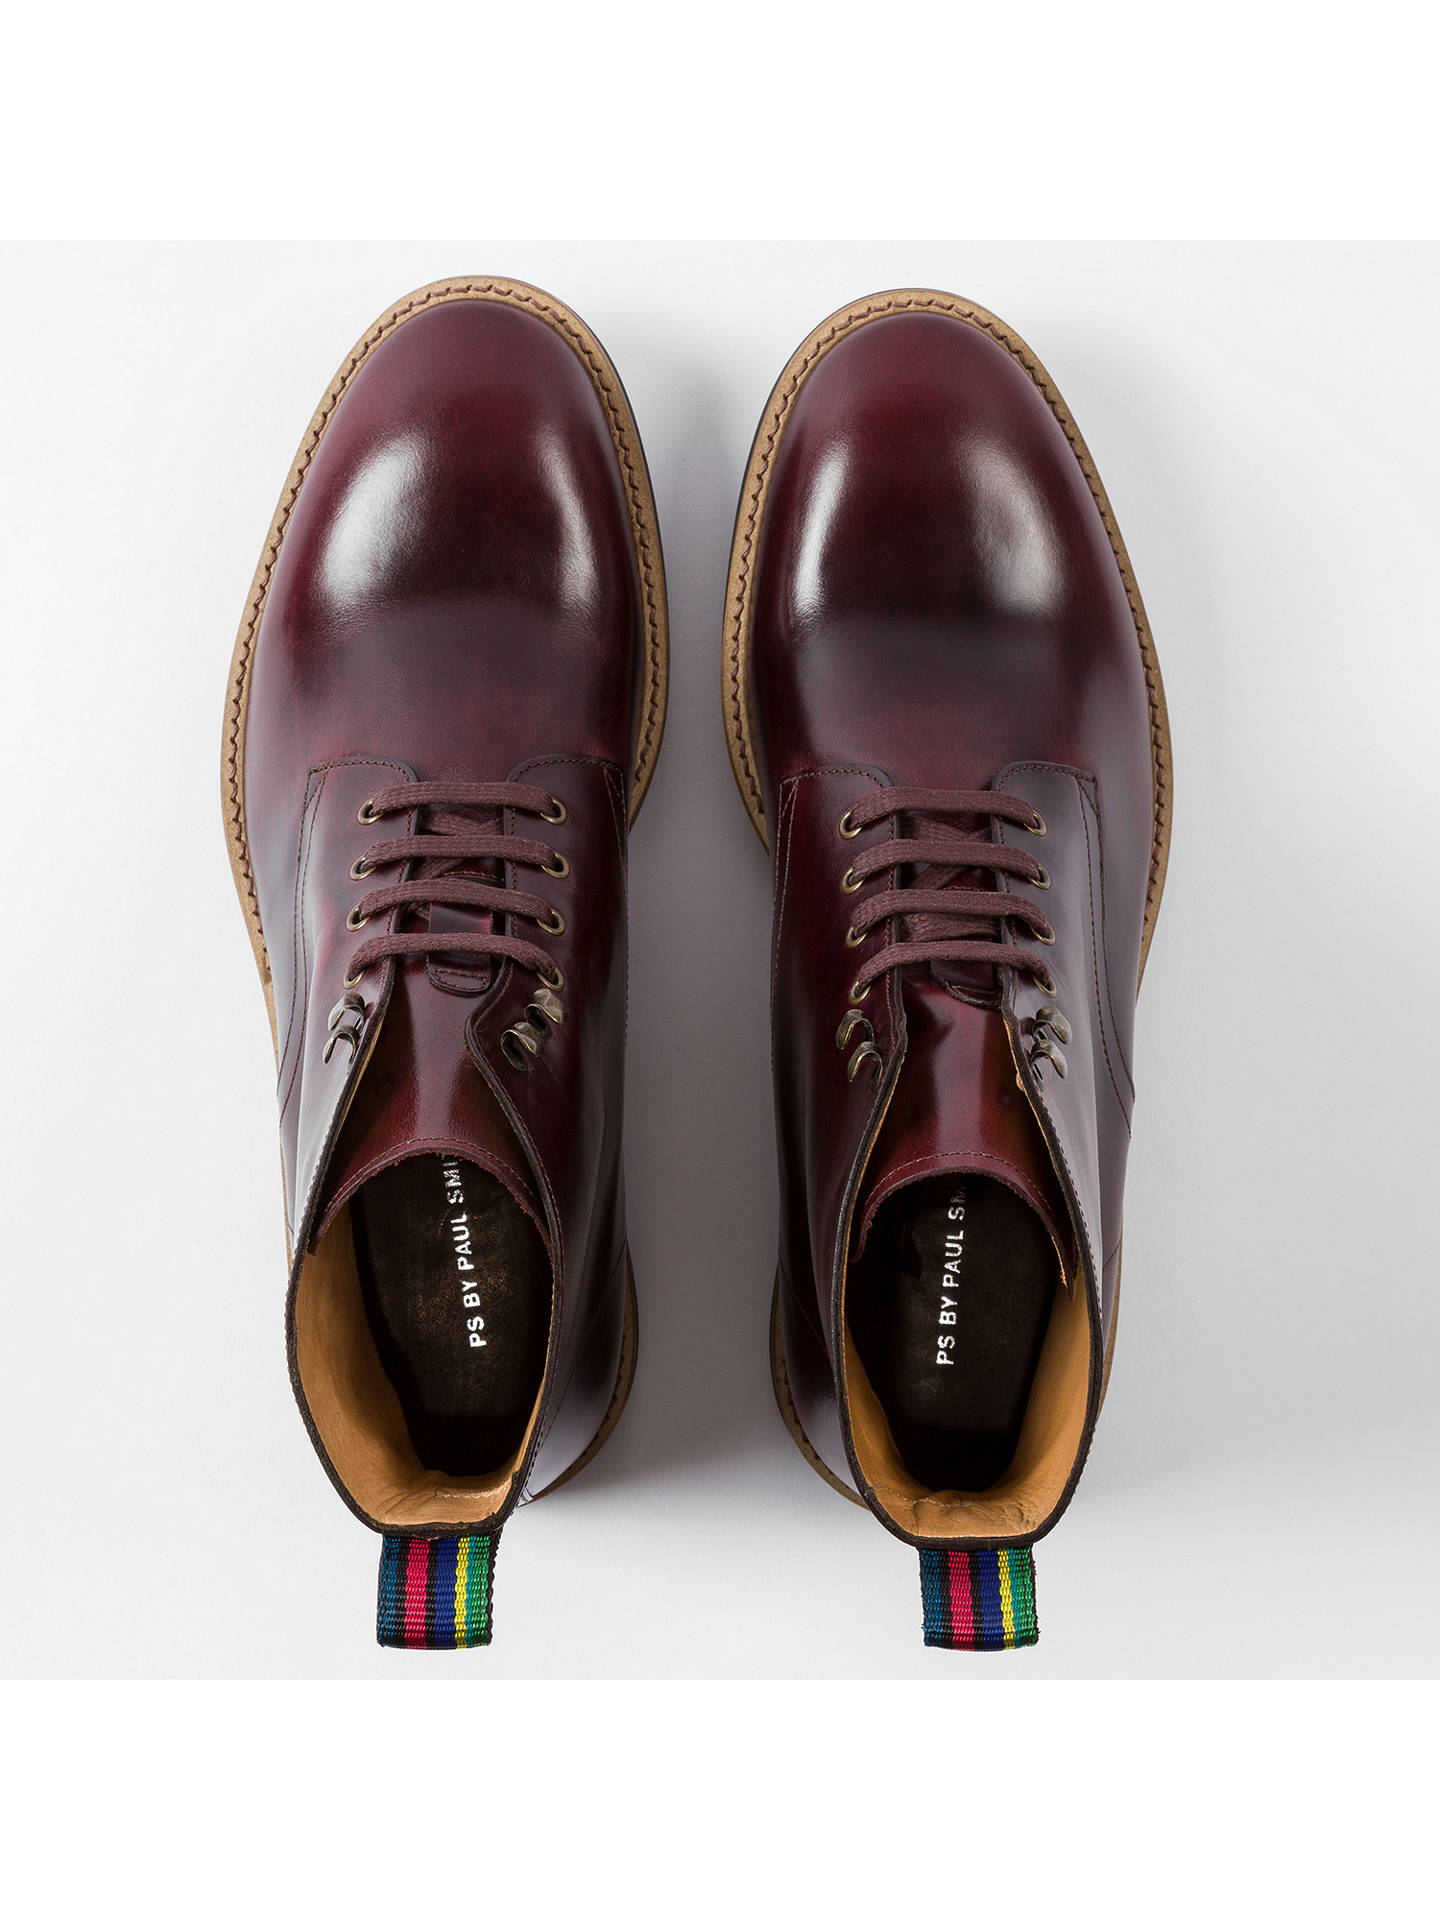 Paul Smith Hamilton Lace Up Leather Boots, Burgundy at John Lewis & Partners